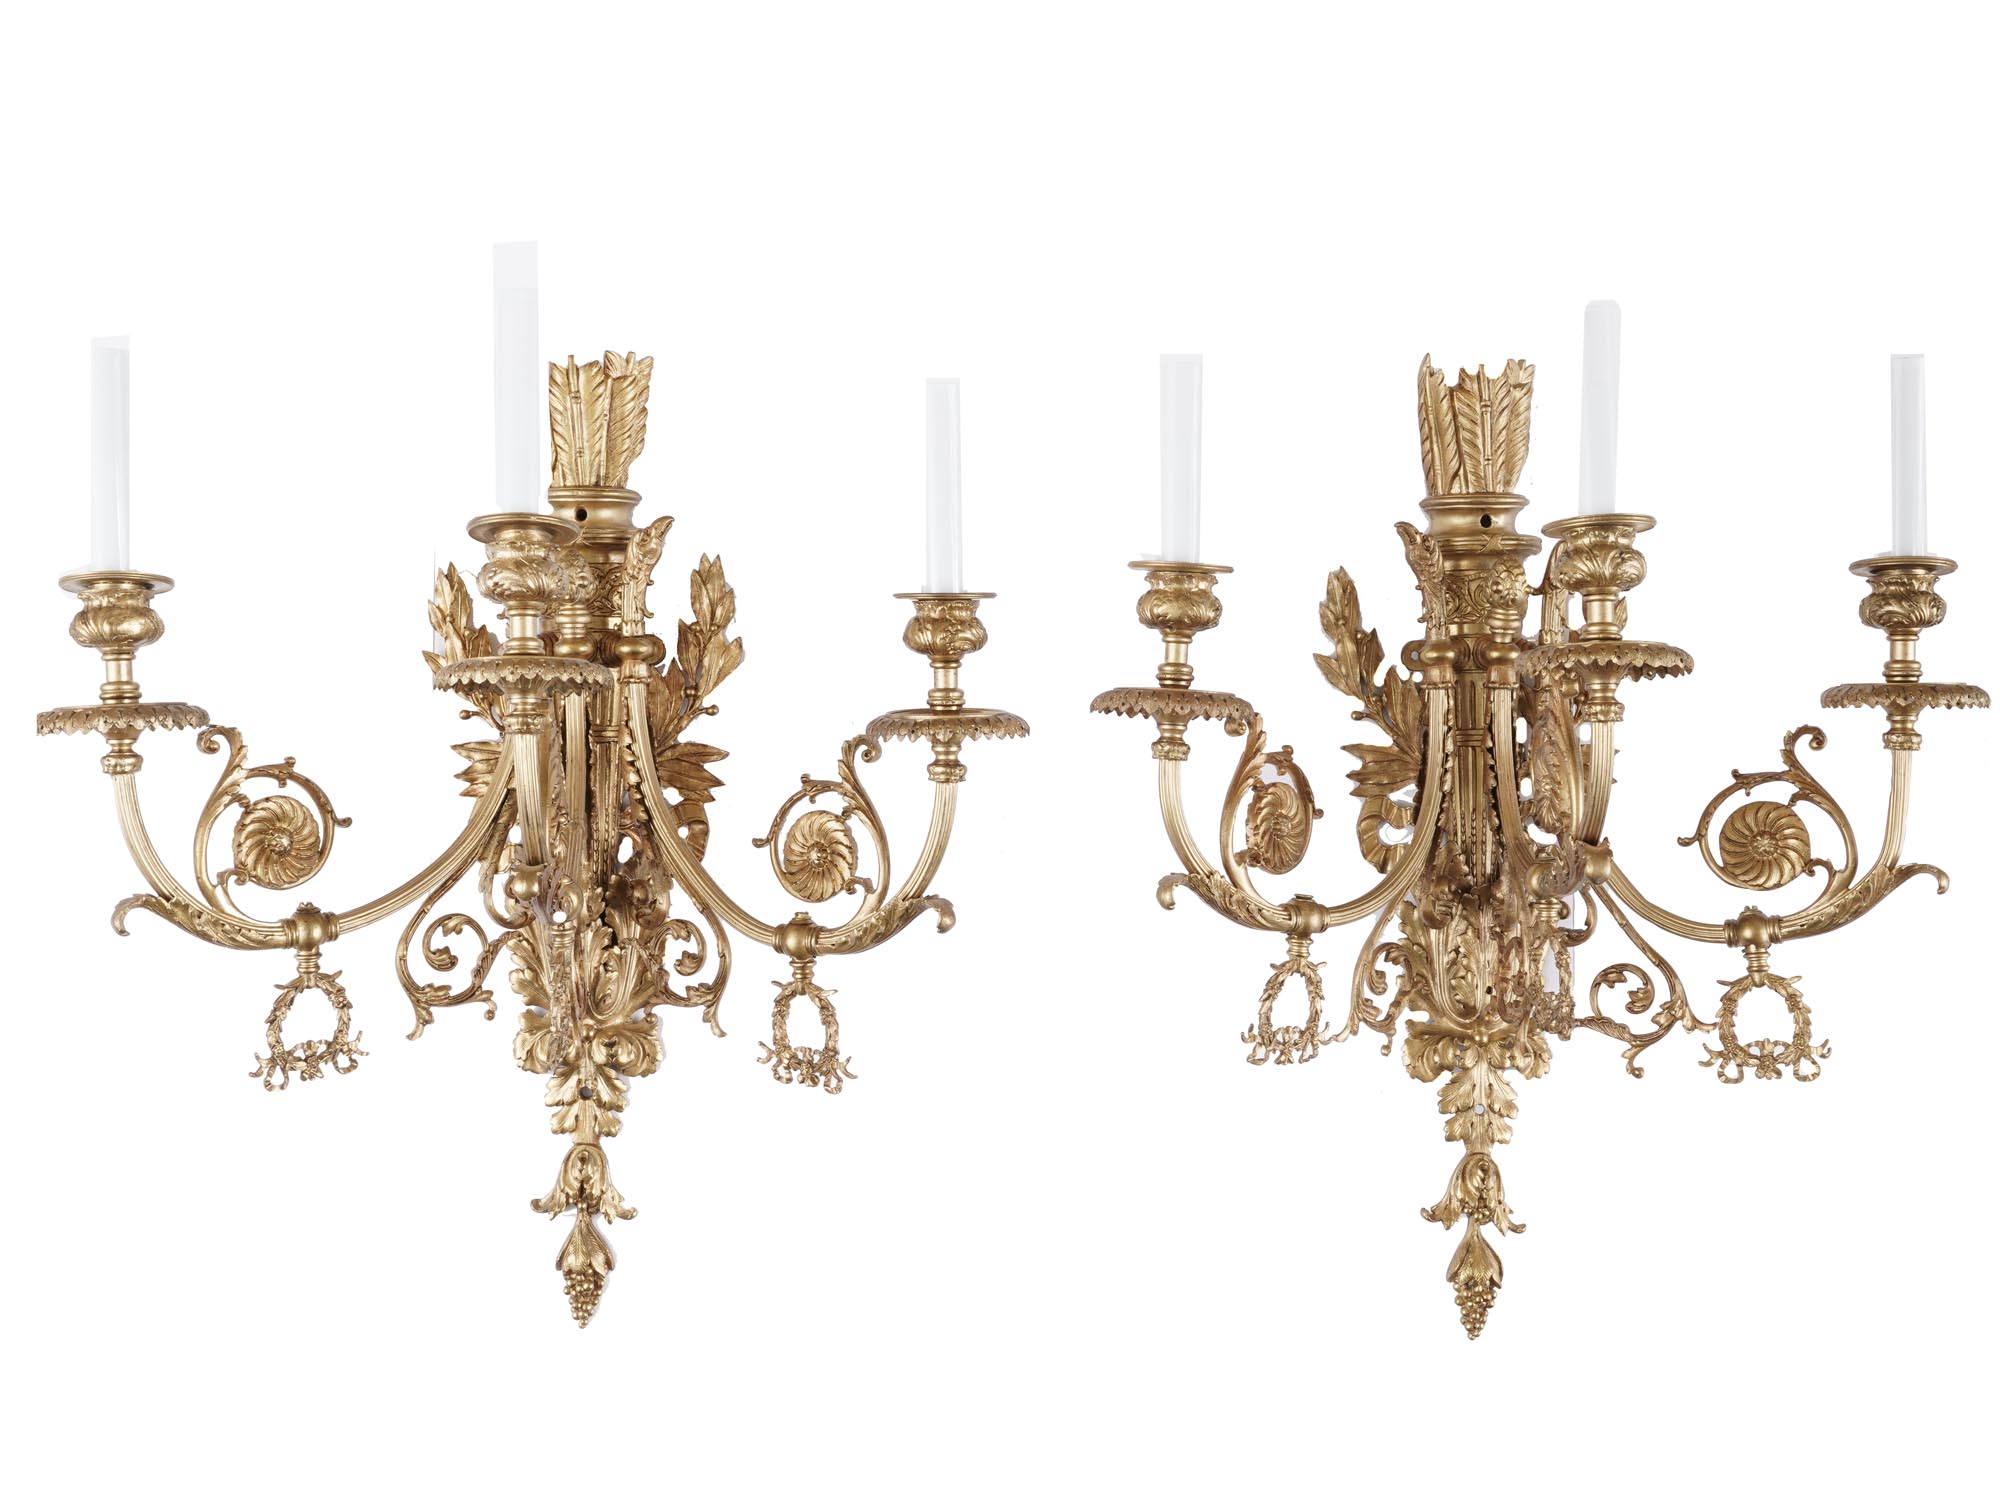 ANTIQUE FRENCH EMPIRE GILT BRONZE WALL SCONCES PIC-0